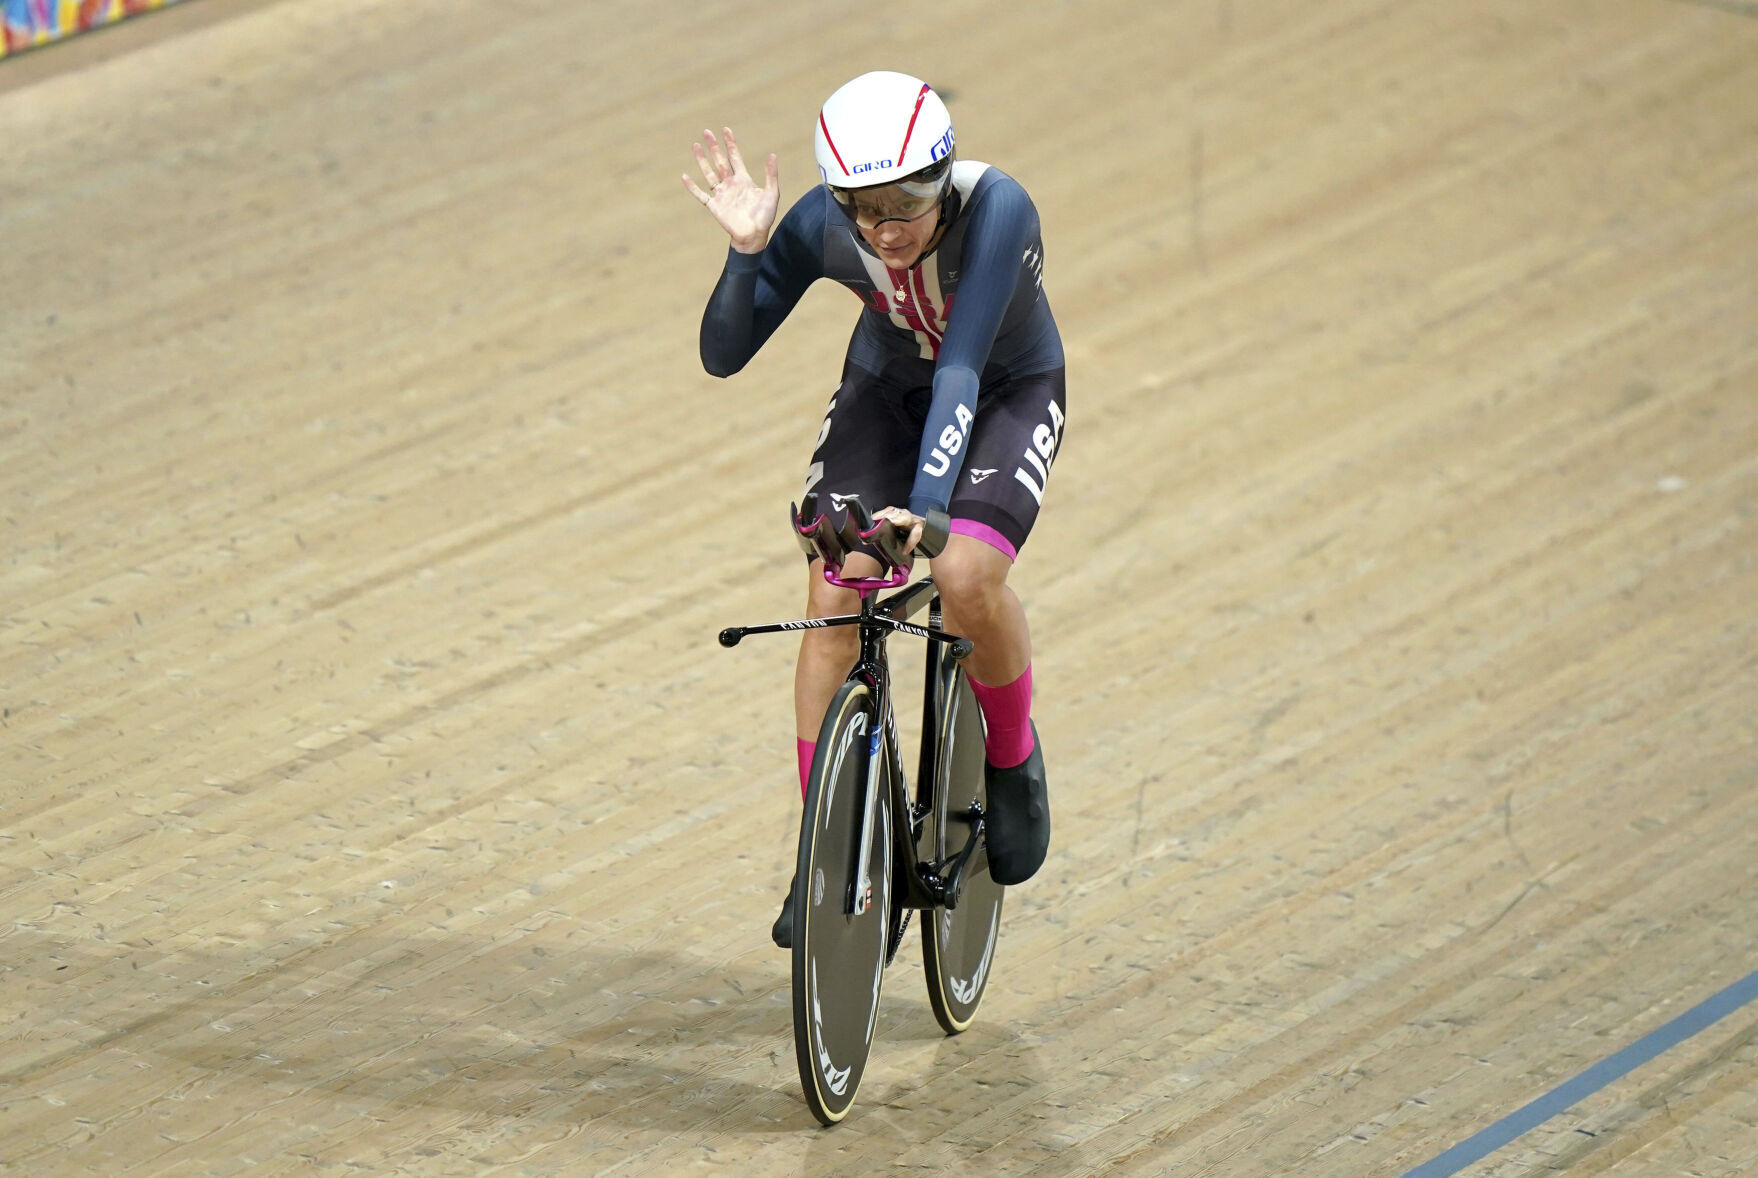 American star Dygert romps to individual pursuit title at cycling worlds